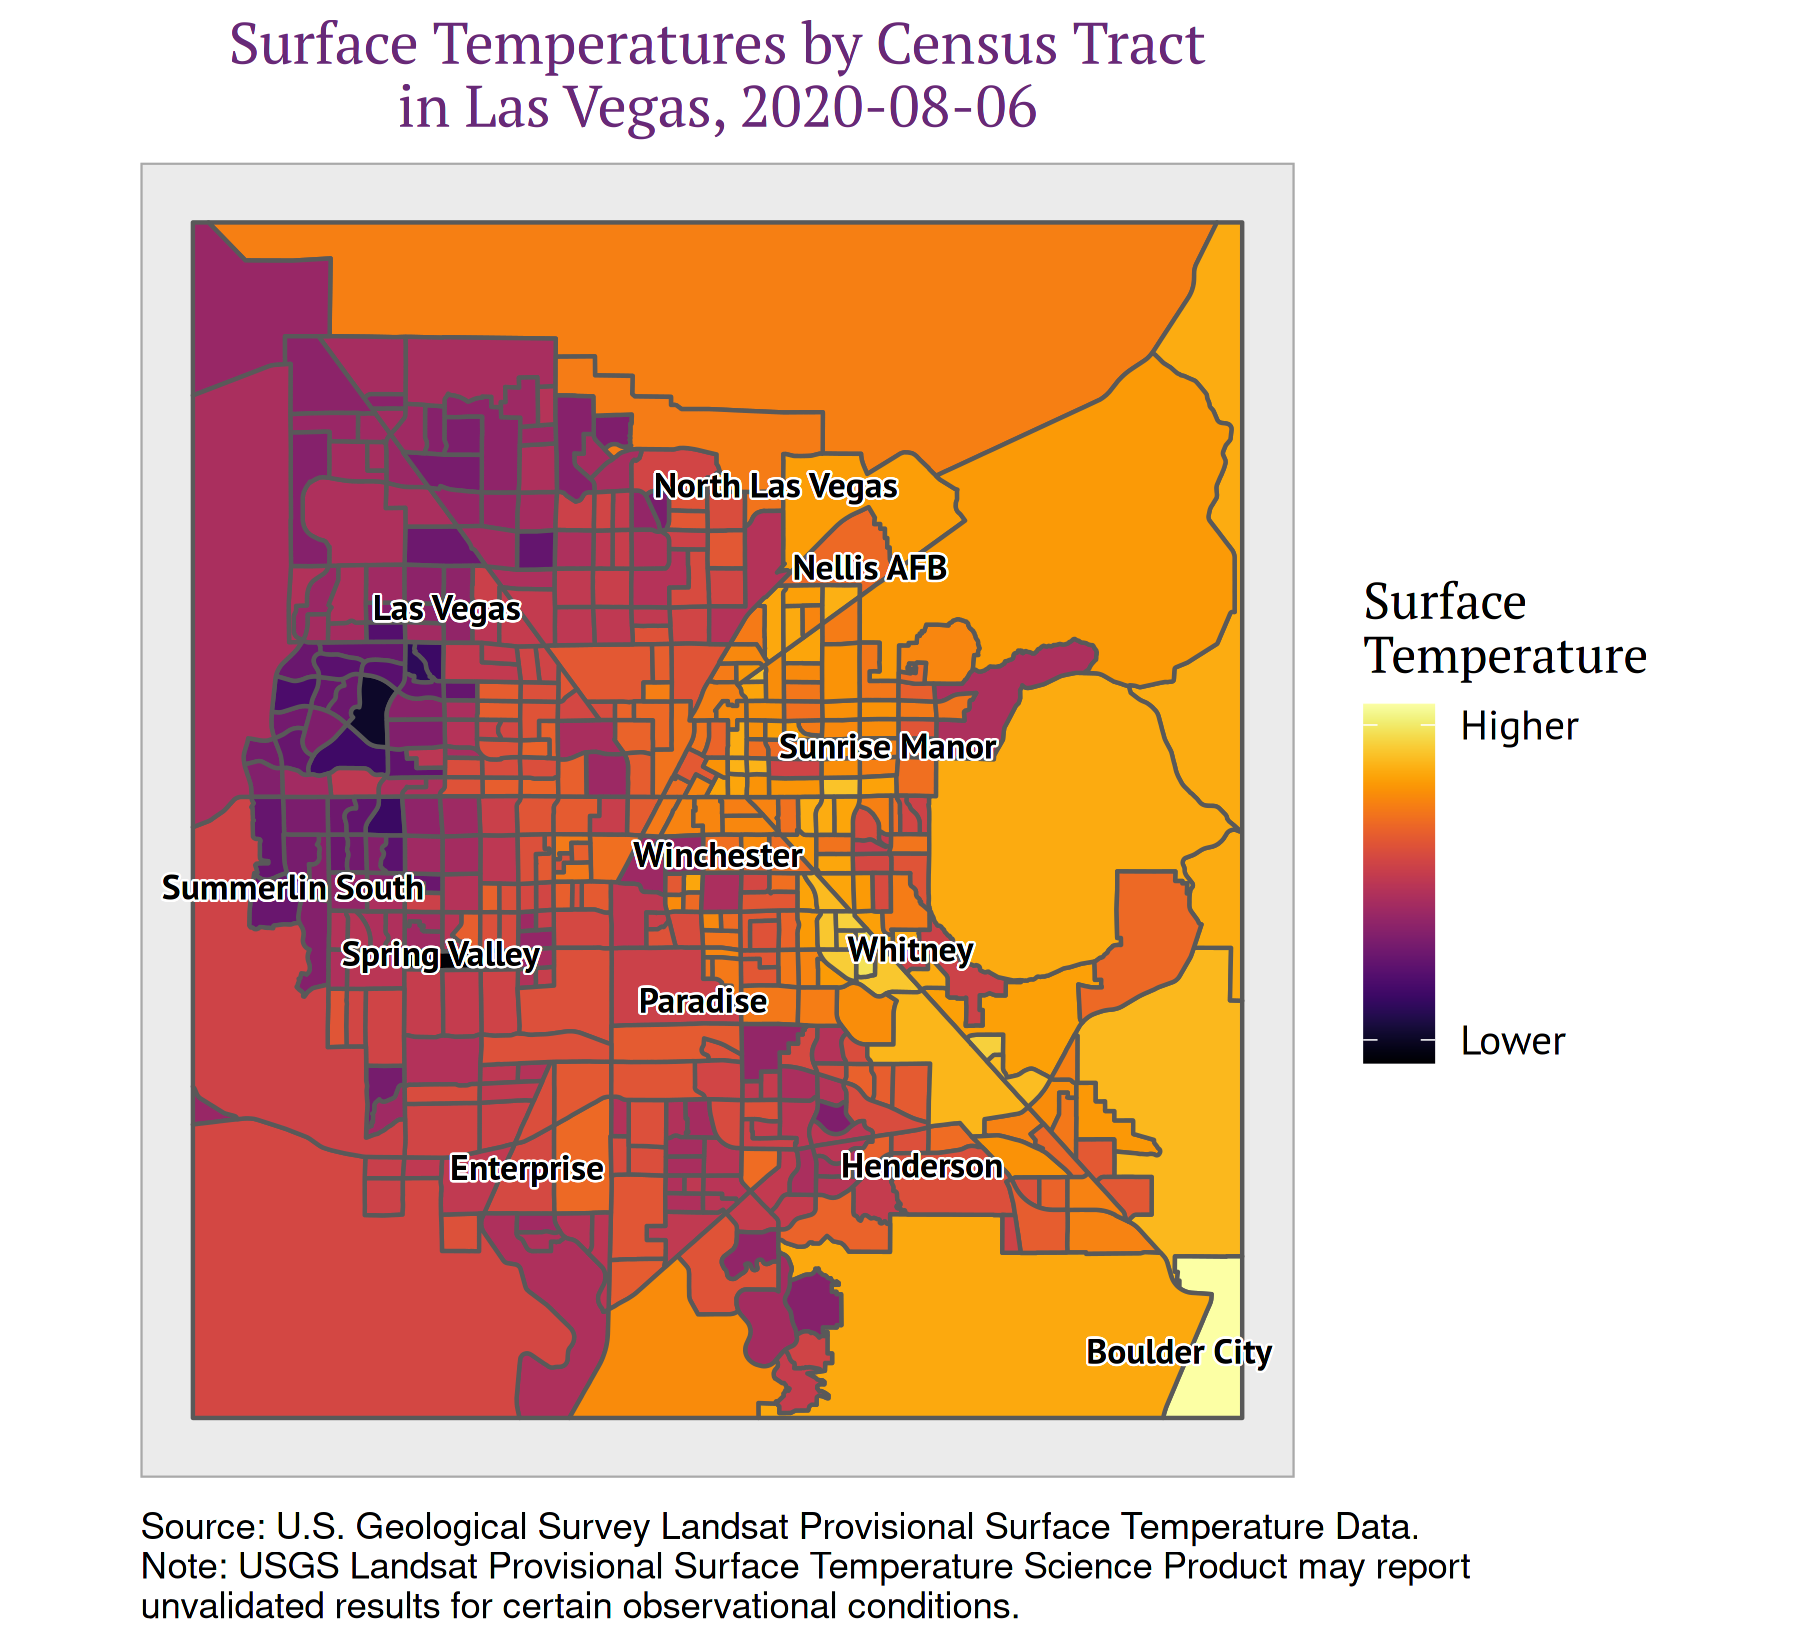 Figure 1: Visualizing Urban Heat by Census Tract in Las Vegas, Nevada